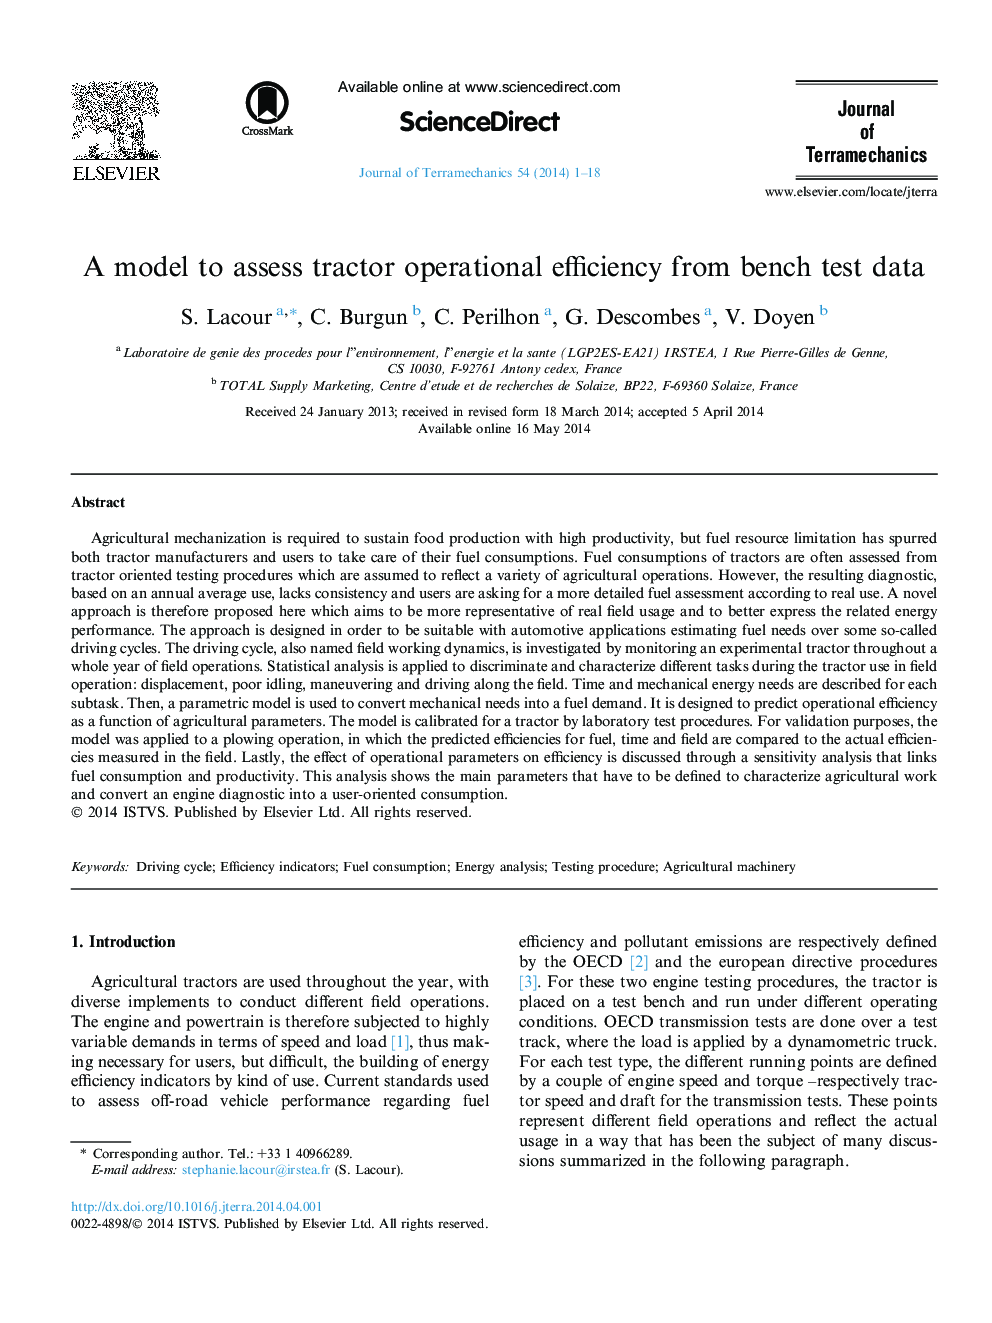 A model to assess tractor operational efficiency from bench test data